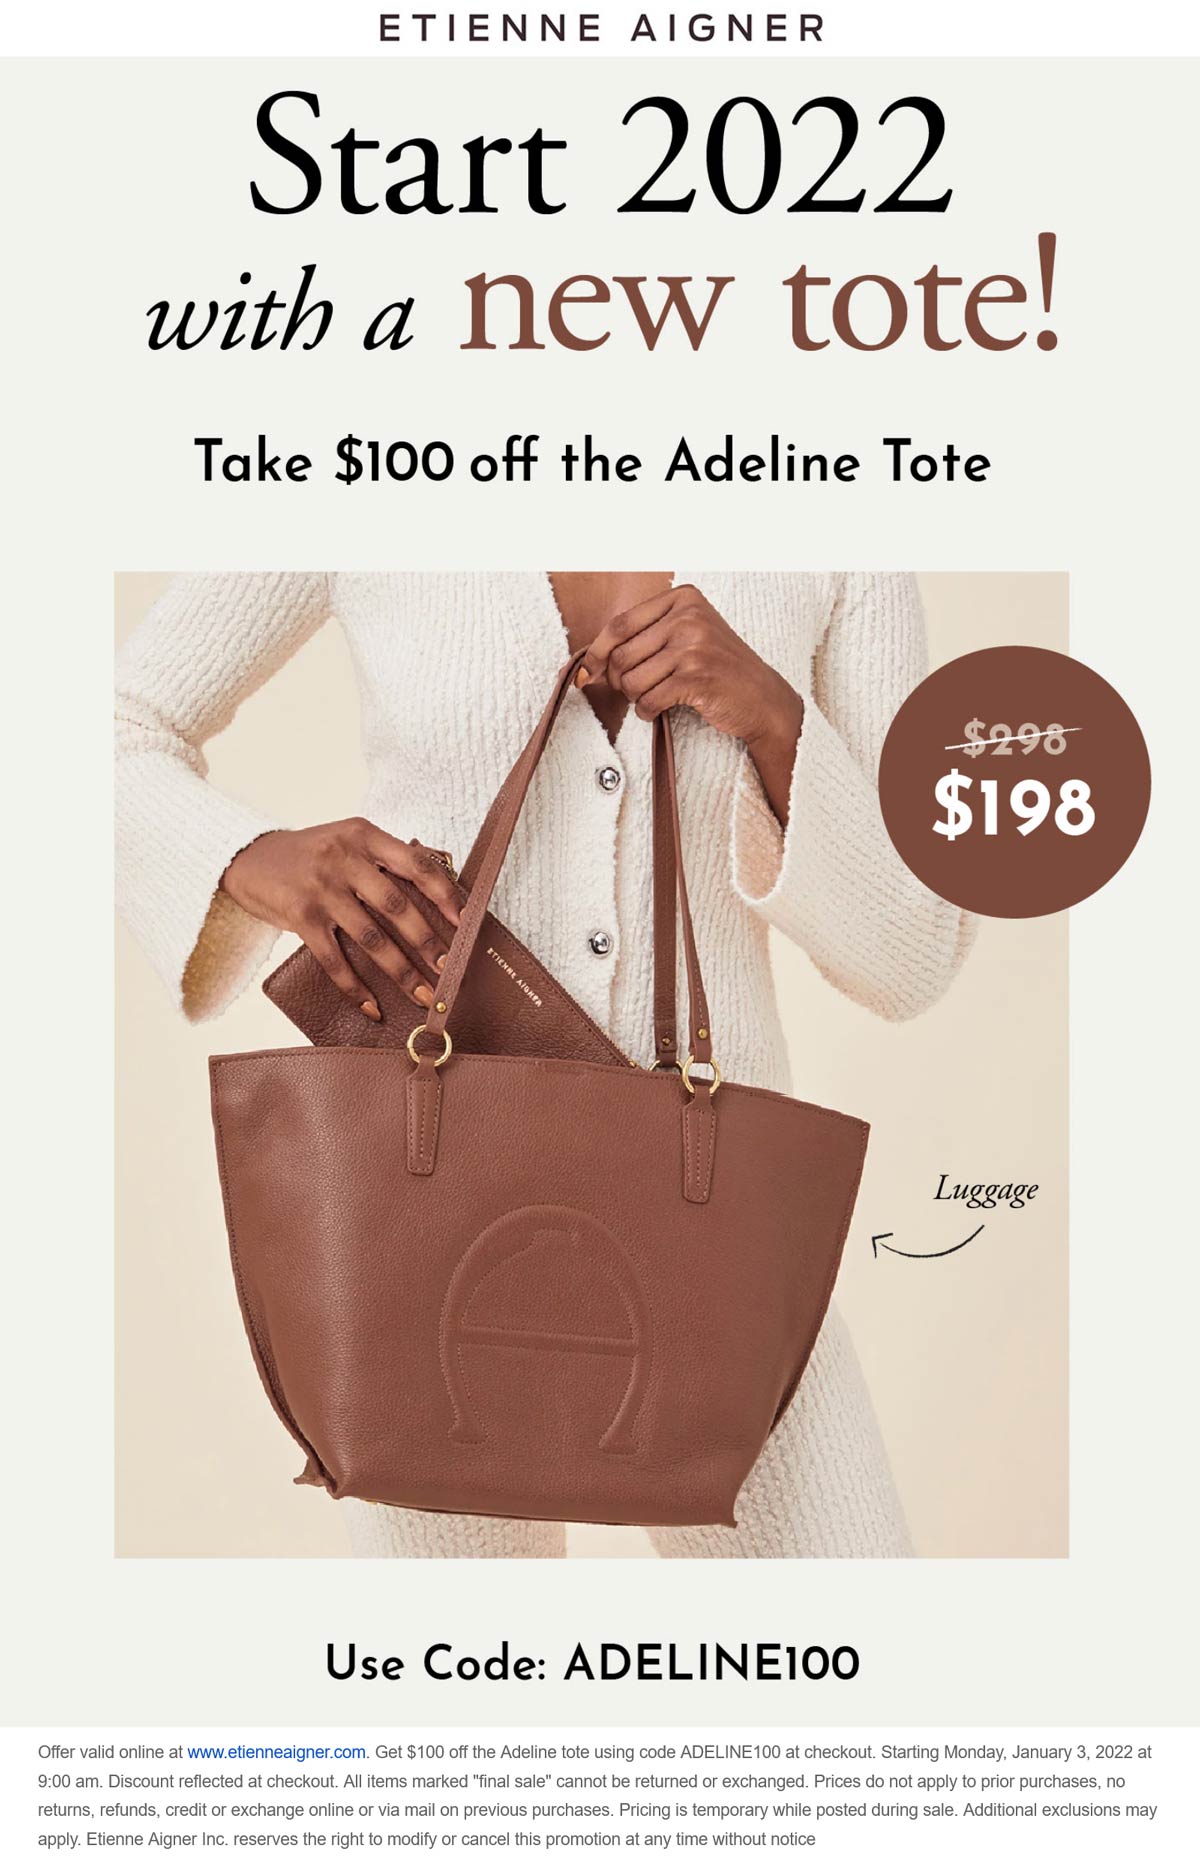 Etienne Aigner stores Coupon  $100 off the Adeline tote at Etienne Aigner via promo code ADELINE100 #etienneaigner 